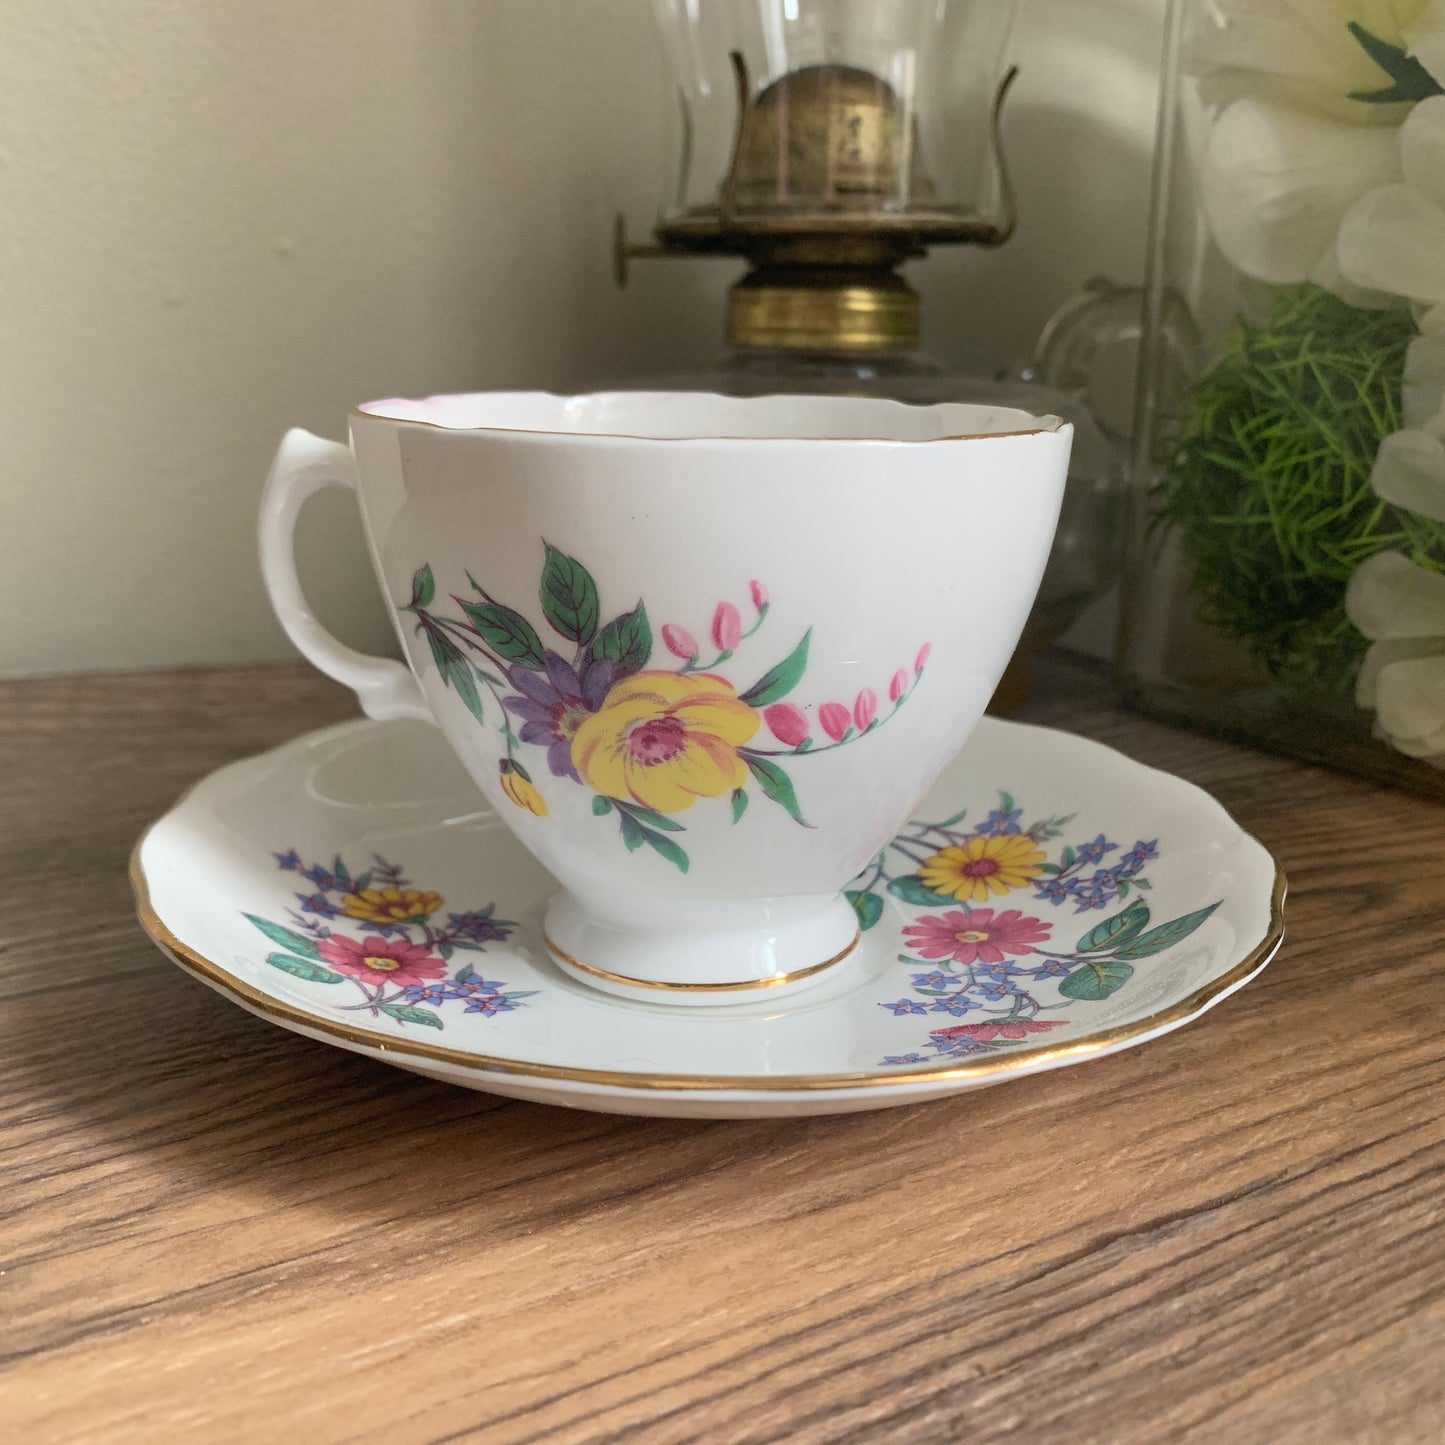 Mismatch Teacup Colourful Floral Tea Cup Pink and Yellow Spring Flowers